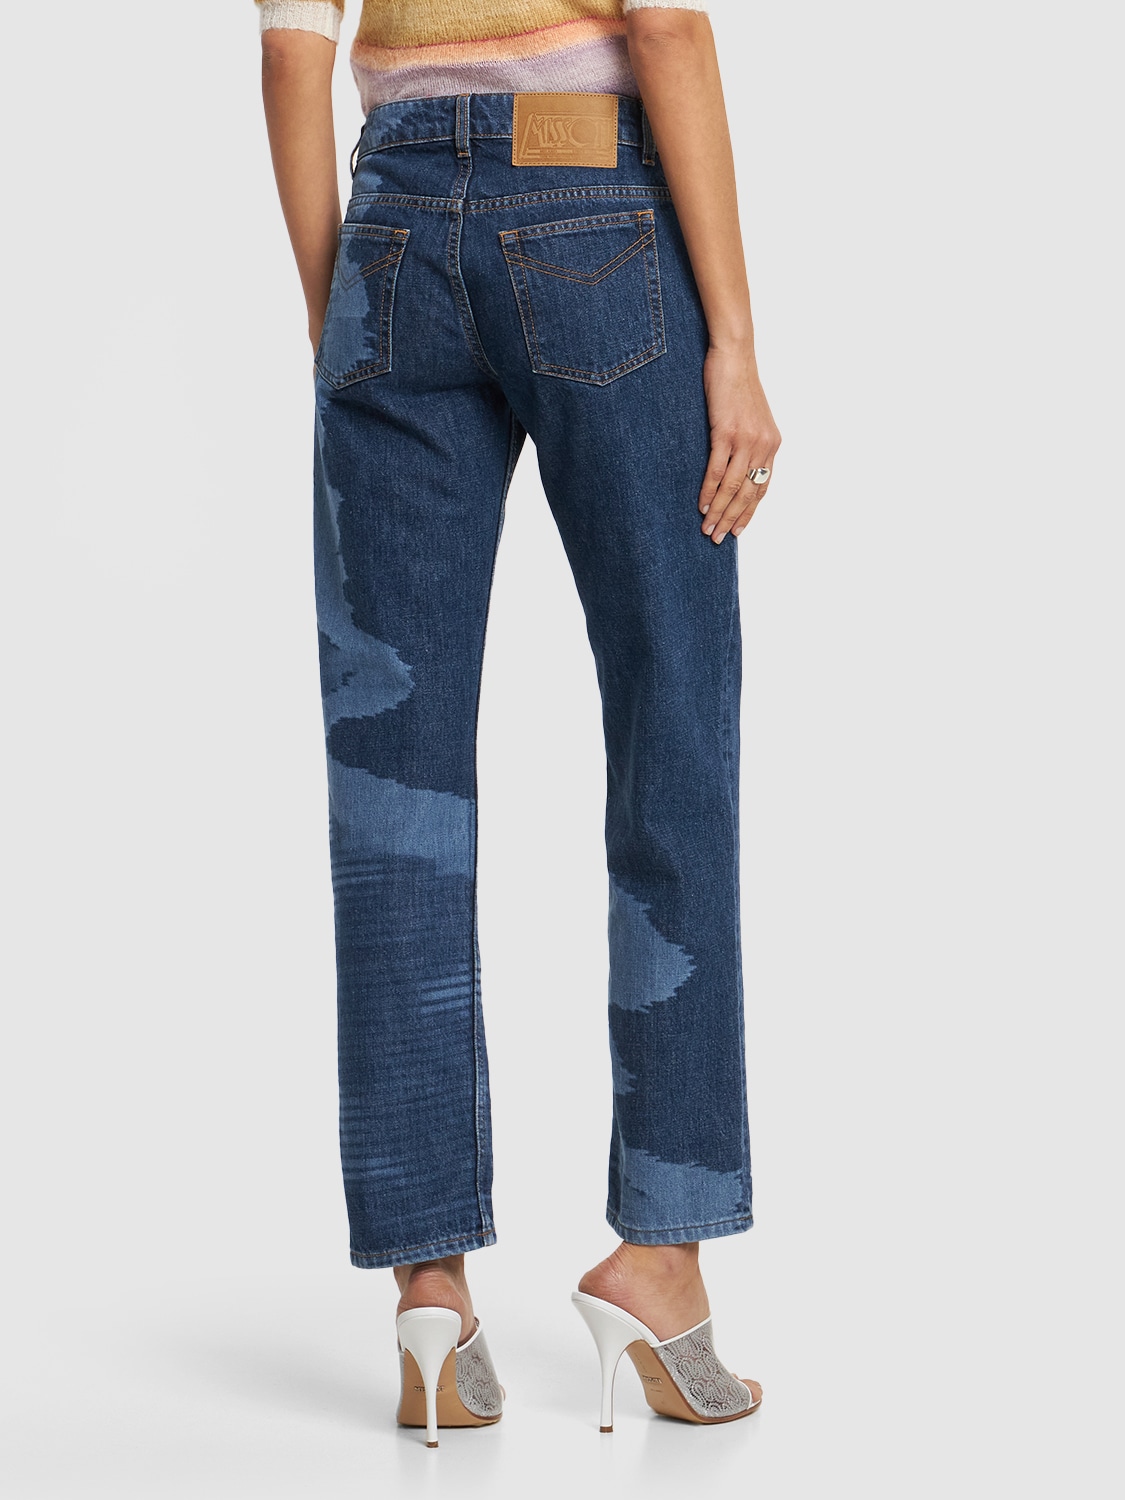 Shop Missoni Space Dyed Cotton Denim Straight Jeans In Space Dye Laser